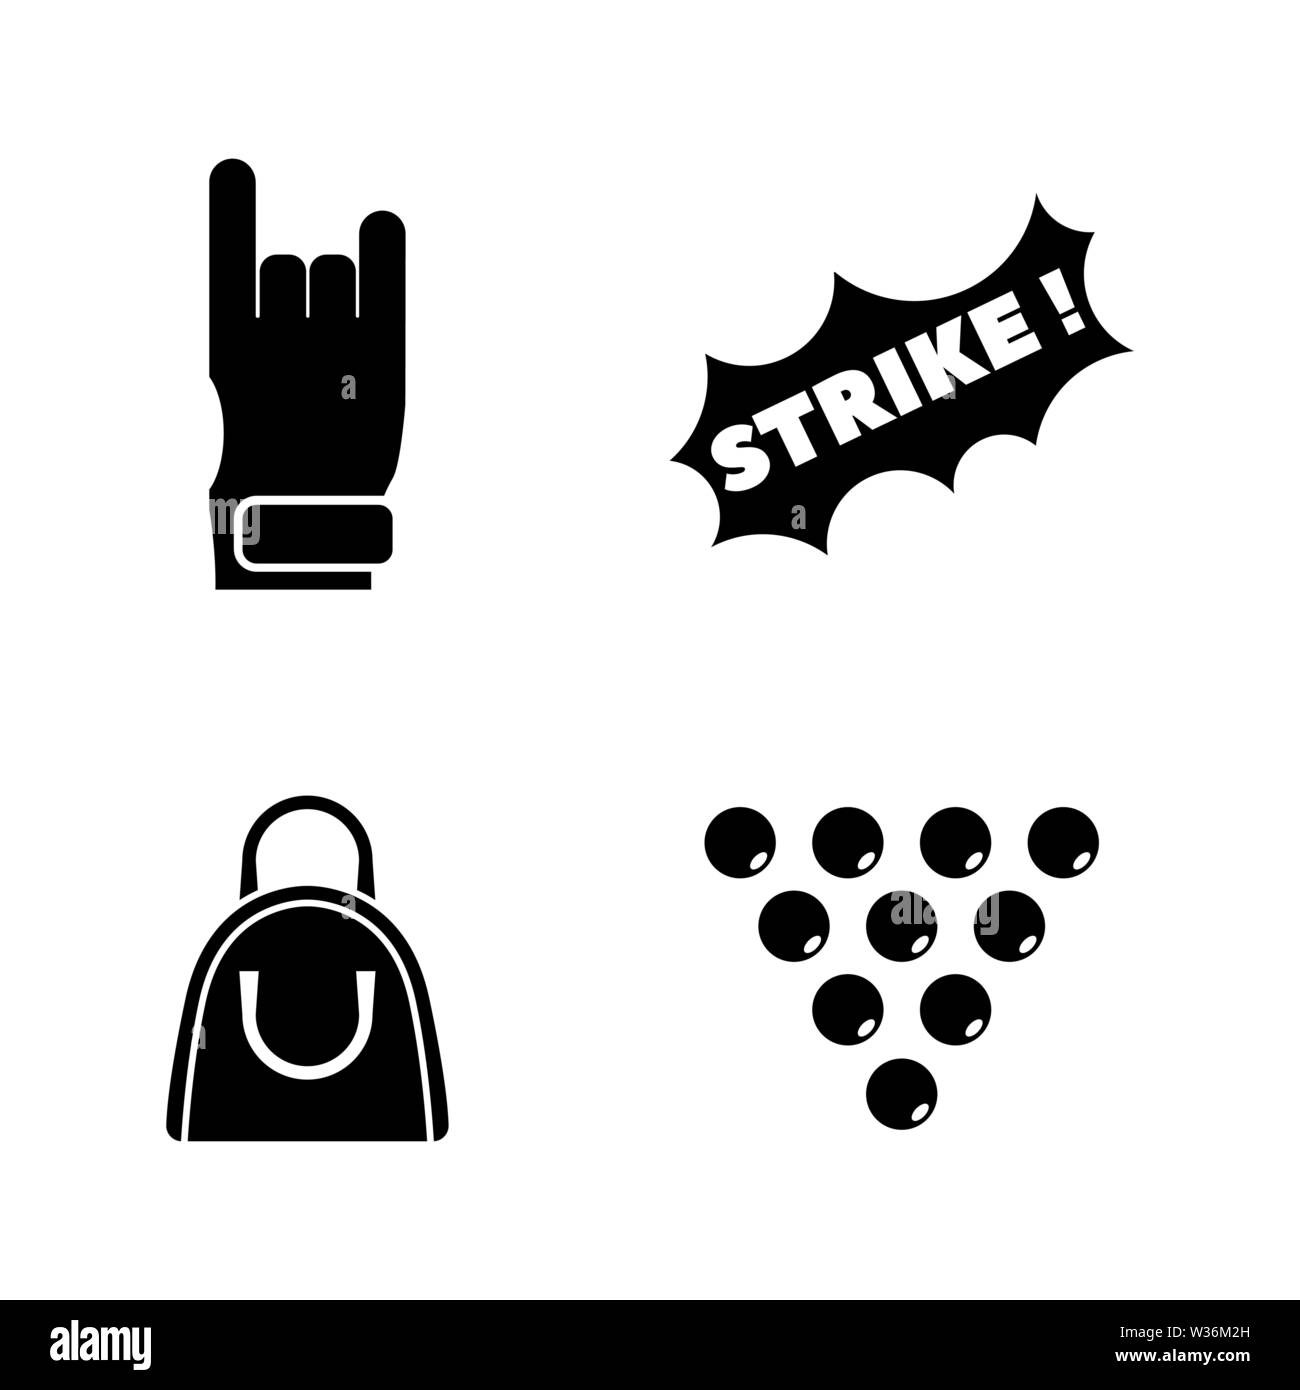 Bowling. Simple Related Vector Icons Set for Video, Mobile Apps, Web Sites, Print Projects and Your Design. Black Flat Illustration on White Backgroun Stock Vector